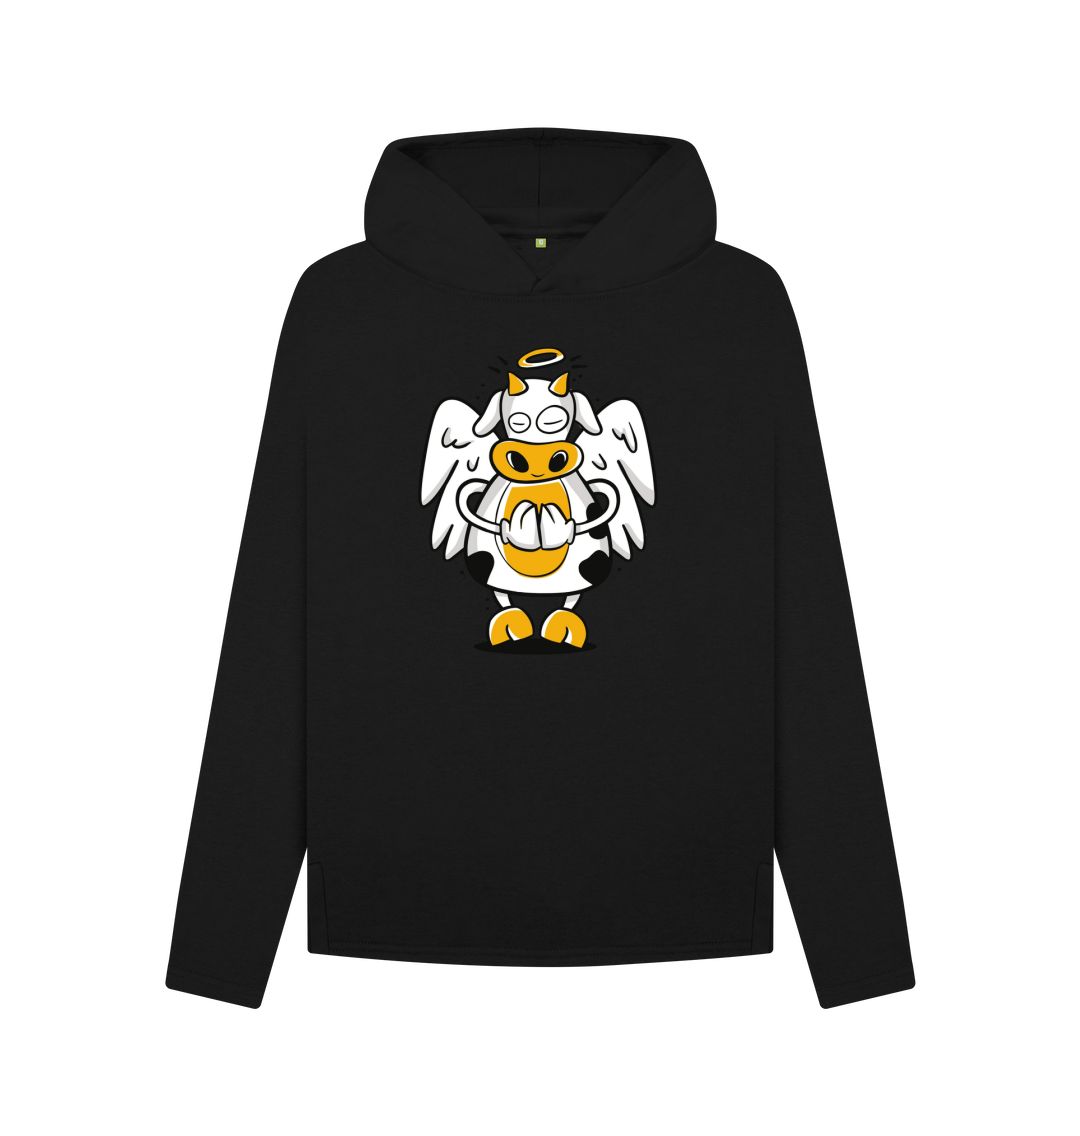 Black Angelic Cow Women's Relaxed Fit Hoodie